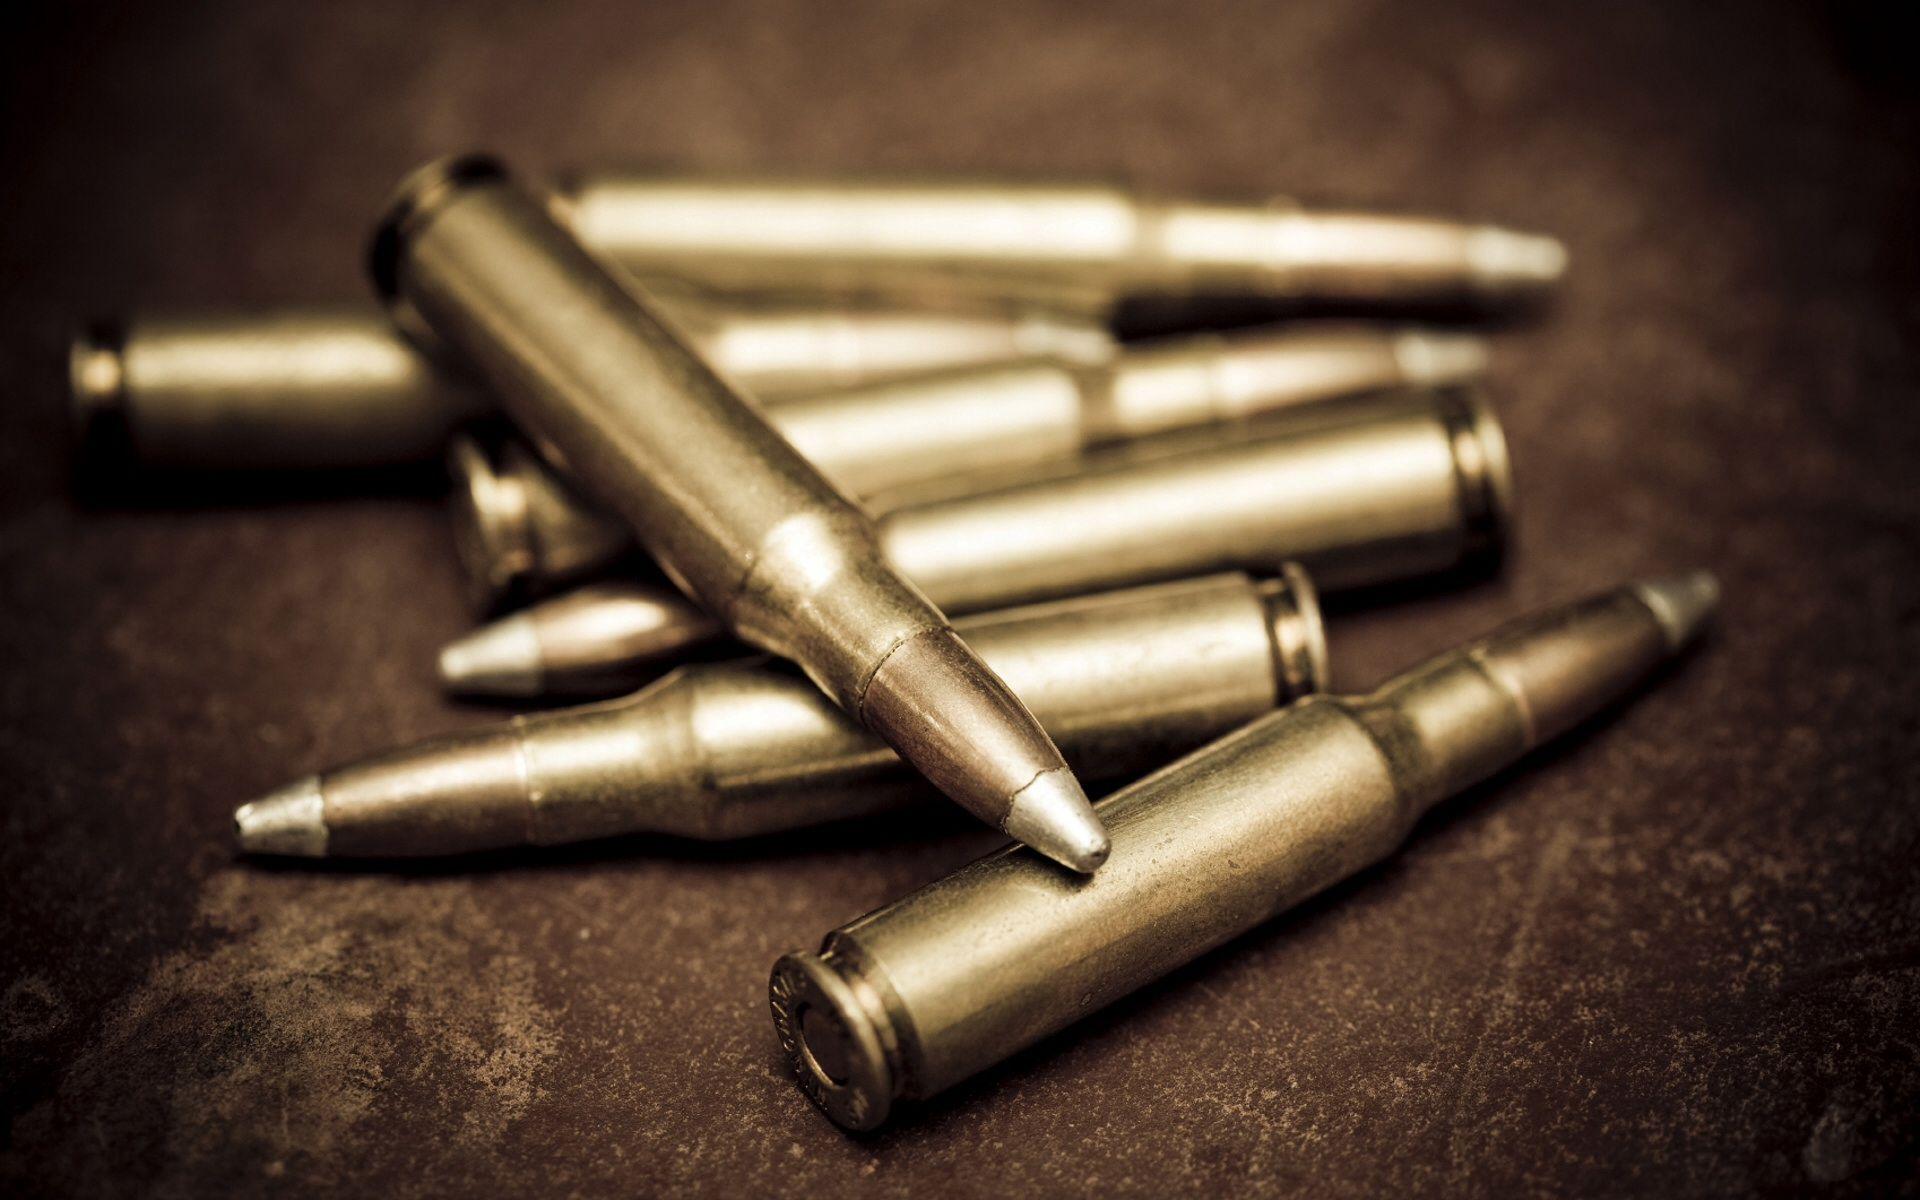 40 Ammunition wallpapers HD  Download Free backgrounds